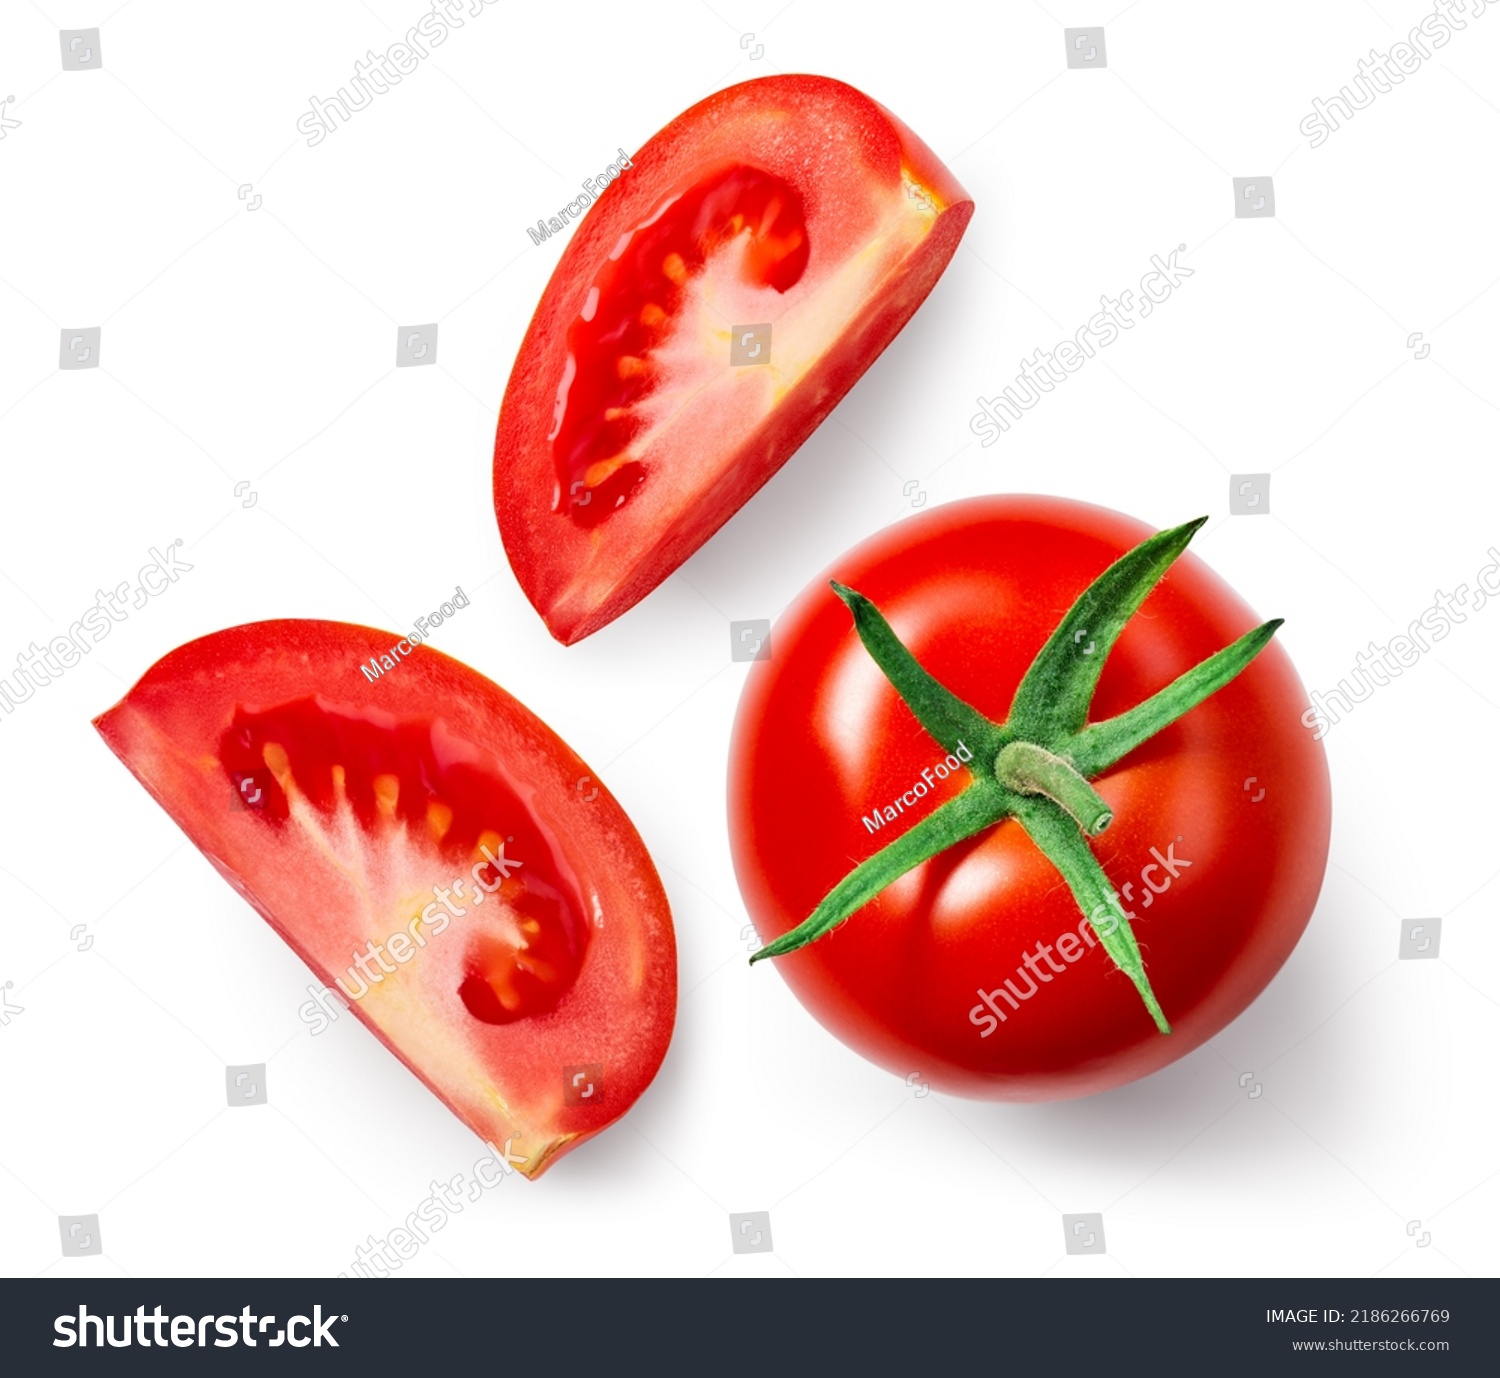 Tomato slice isolated. Tomato whole and slices top view on white background. Set of tomatoes with clipping path. #2186266769